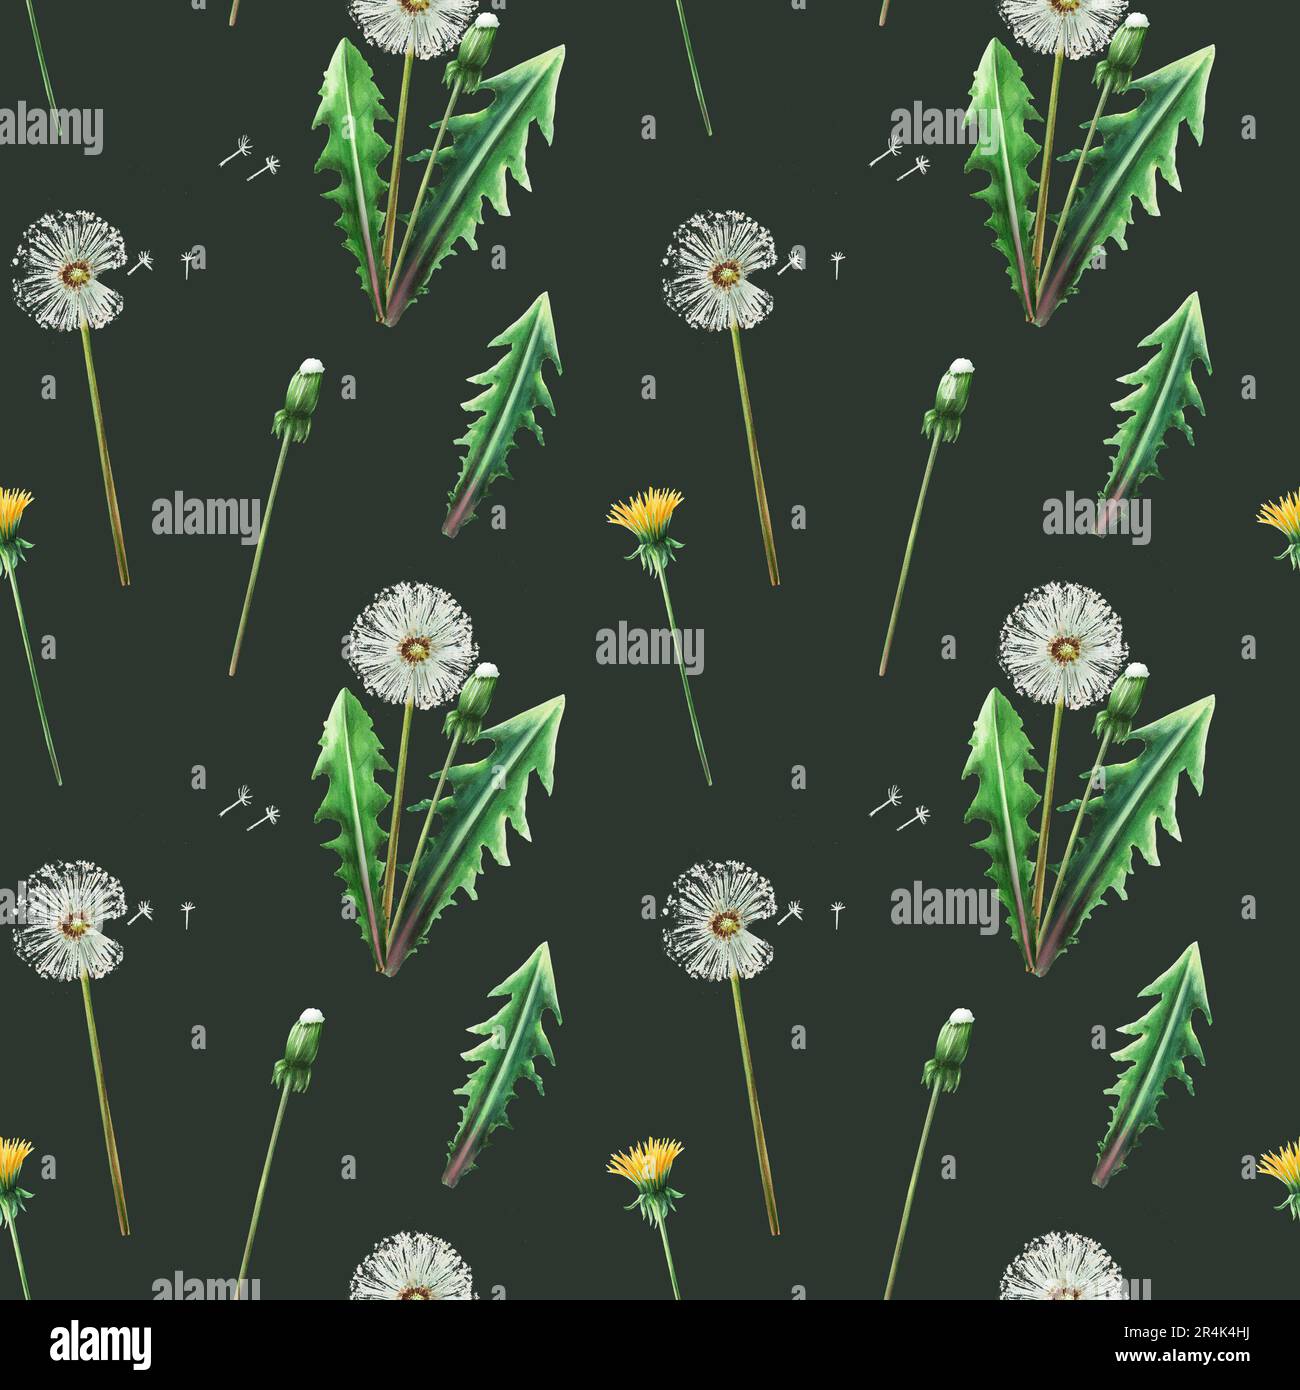 Watercolor seamless pattern with dandelions flowers and green leaves. Hand painting clipart botanical meadow illustration n a white isolated backgroun Stock Photo